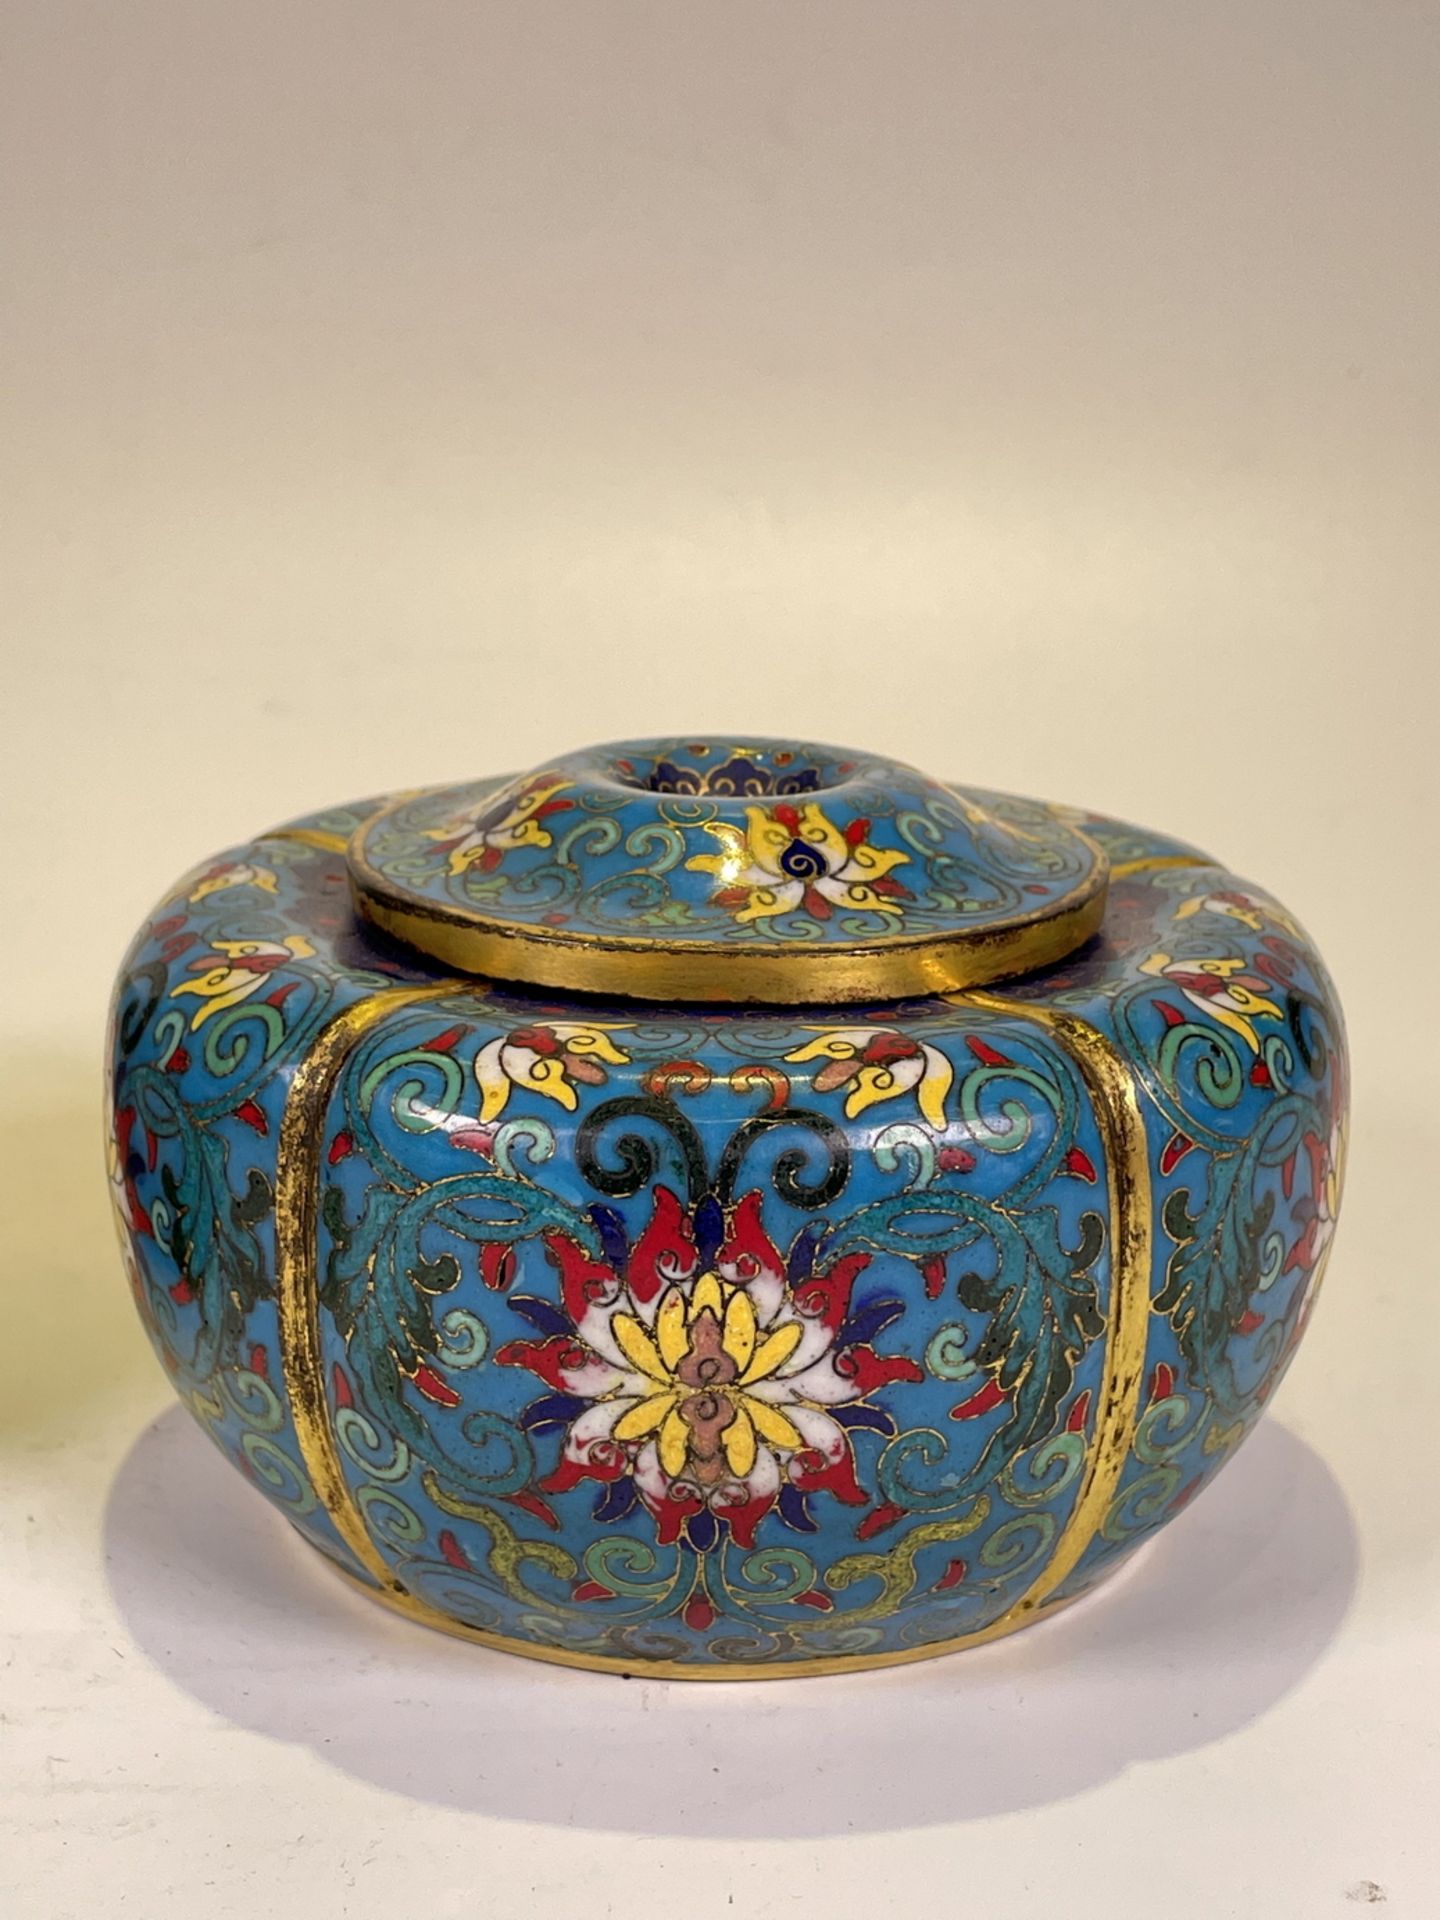 FINE CHINESE CLOISONNE, 18TH/19TH Century Pr. Collection of NARA private gallary.  - Bild 2 aus 6